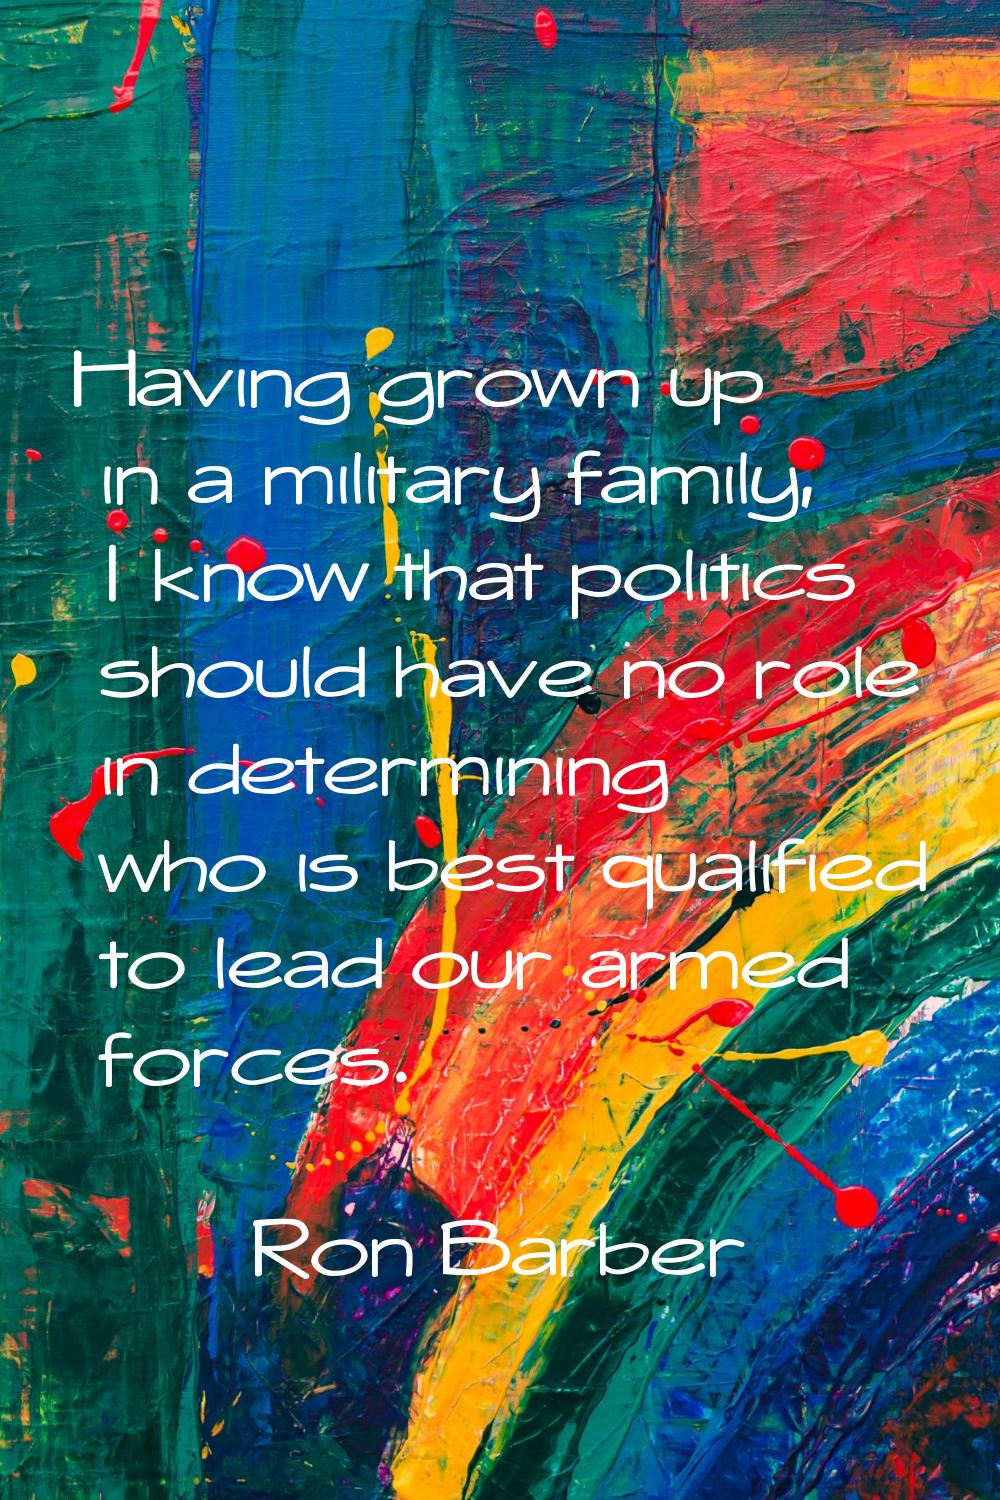 Having grown up in a military family, I know that politics should have no role in determining who i